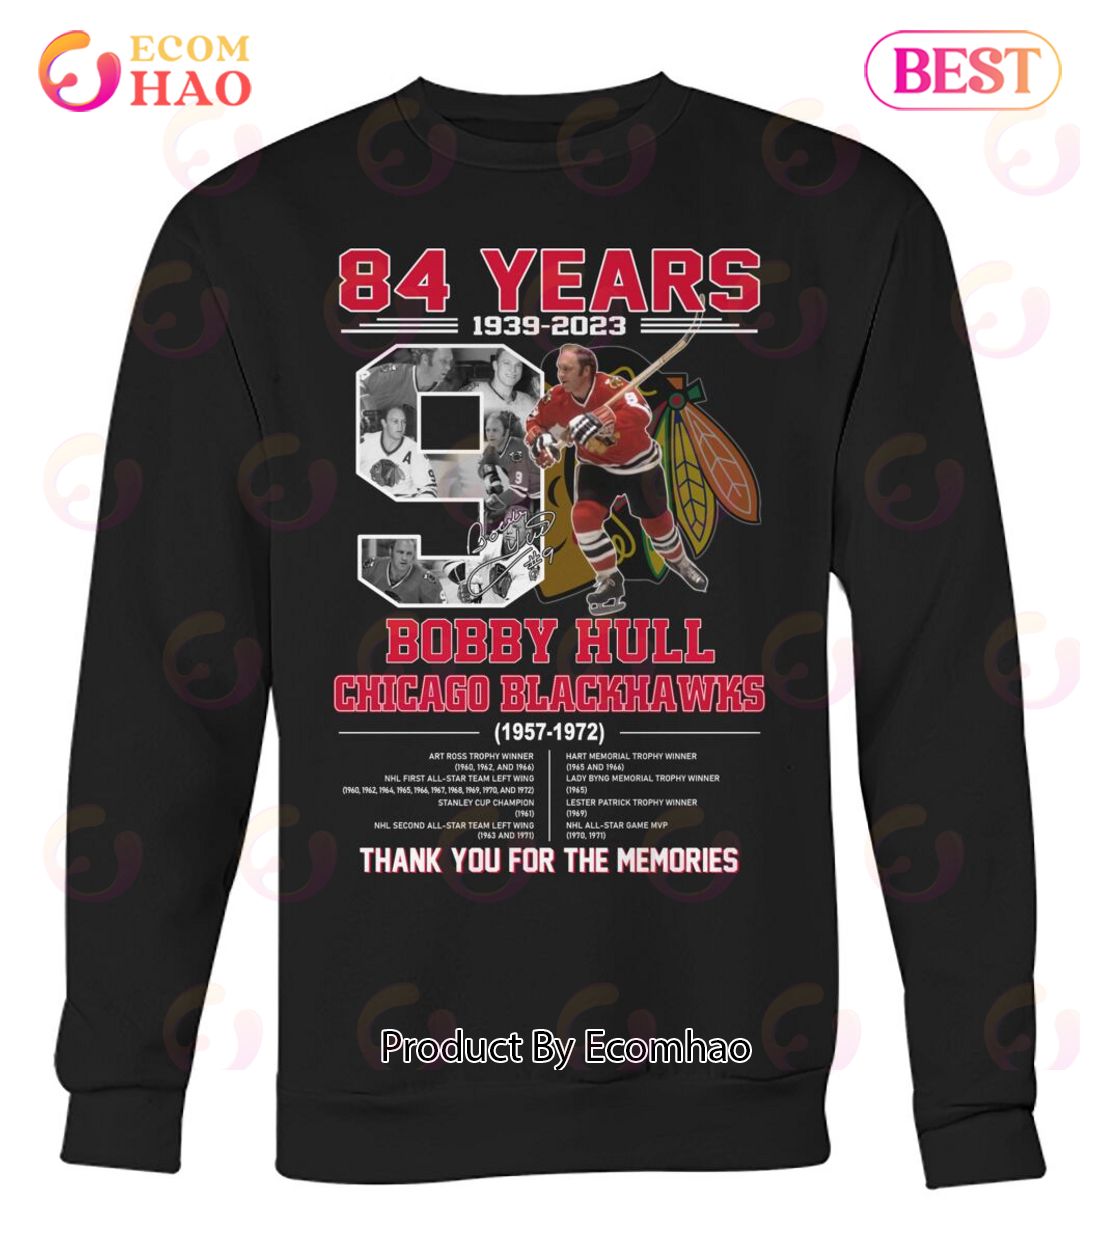 84 Years 1939 - 2023 Bobby Hull Chicago Blackhawks 1957 - 1972 Thank You For The Memories T-Shirt